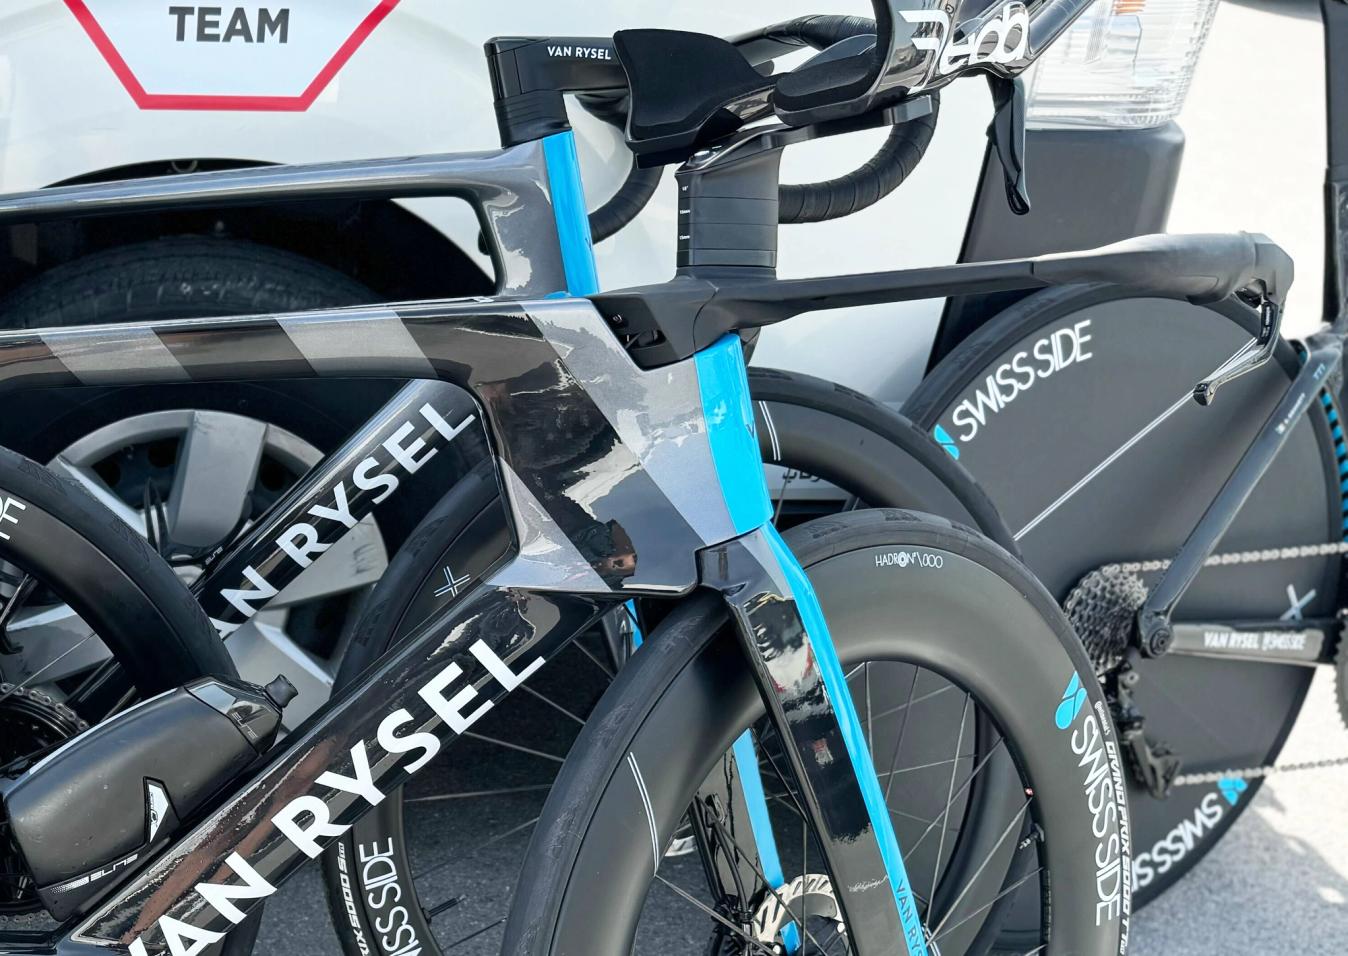 Deep head tubes are the norm on time trial bikes but the XCR's is up there with the deepest we’ve seen